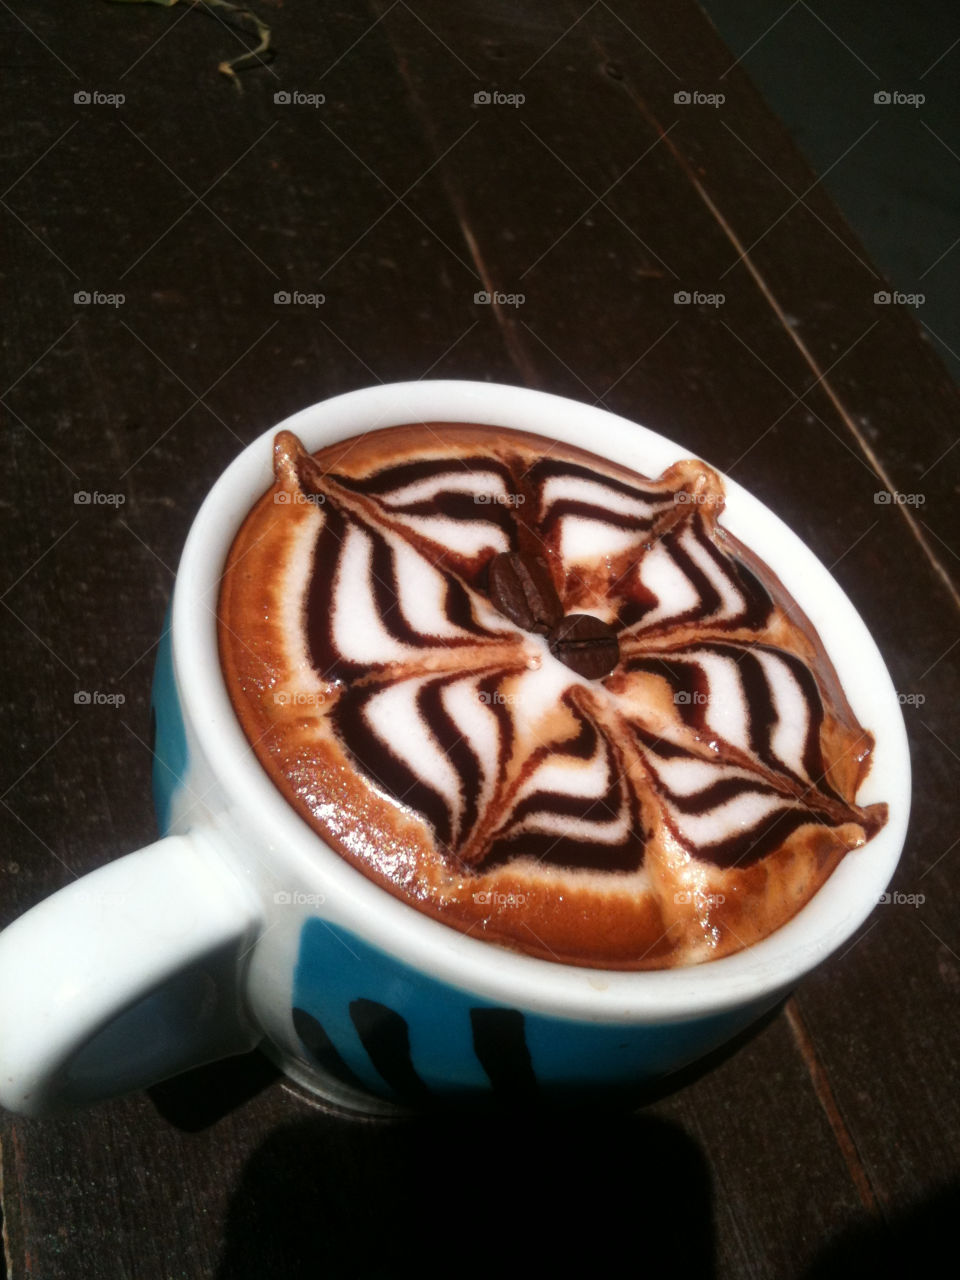 morning coffe art chocolate by 13490wp